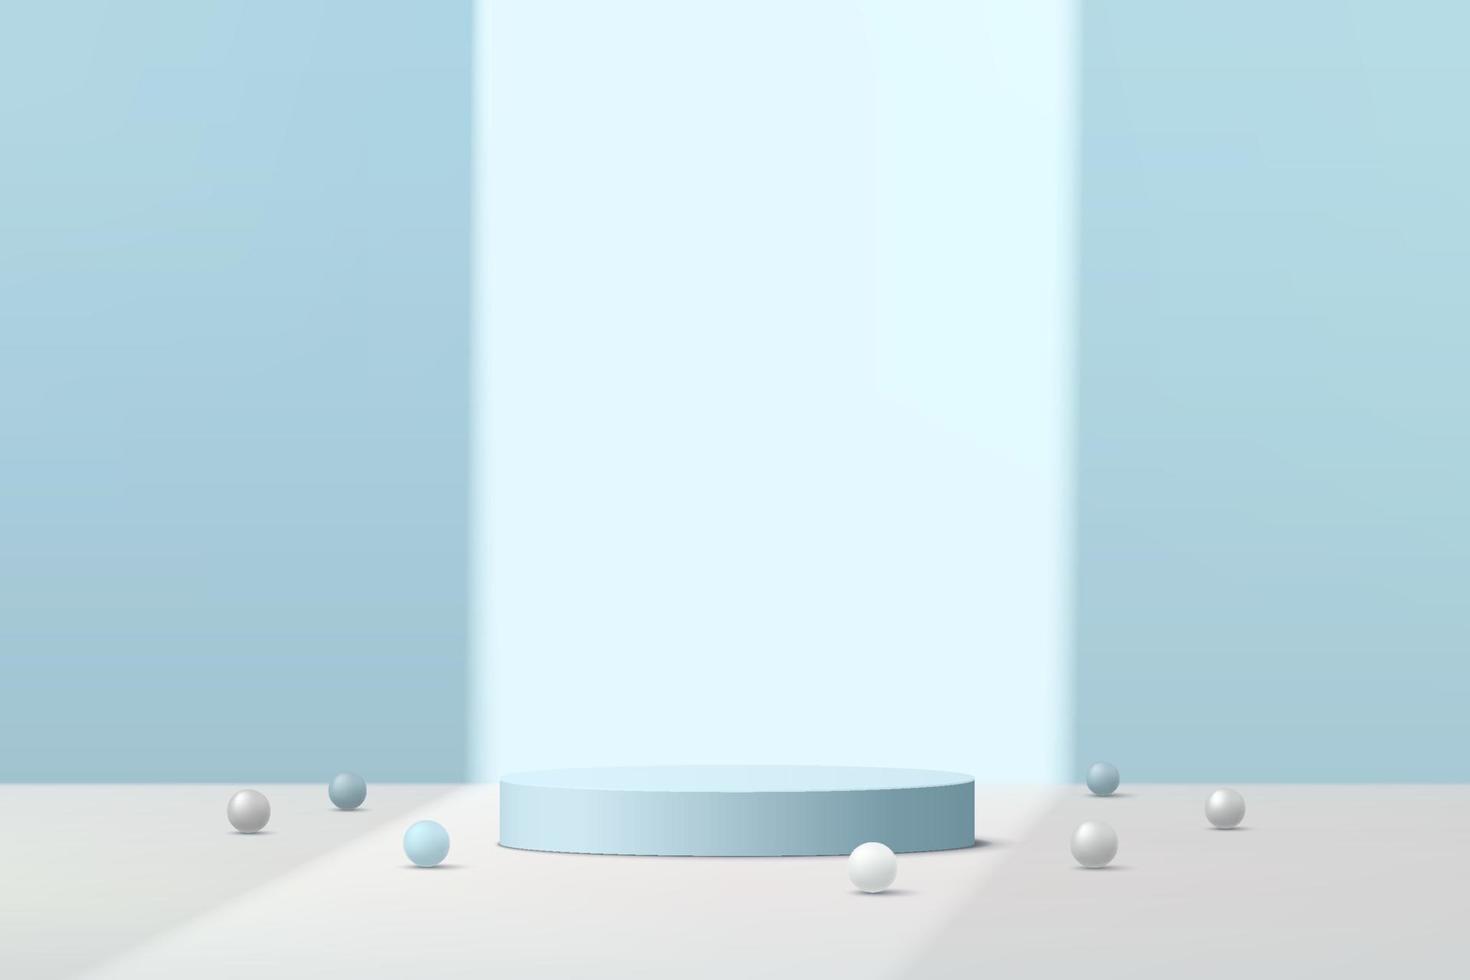 Abstract light blue 3D cylinder pedestal podium with white sphere ball on pastel blue minimal wall scene for cosmetic product display presentation. Vector geometric rendering platform design in shadow